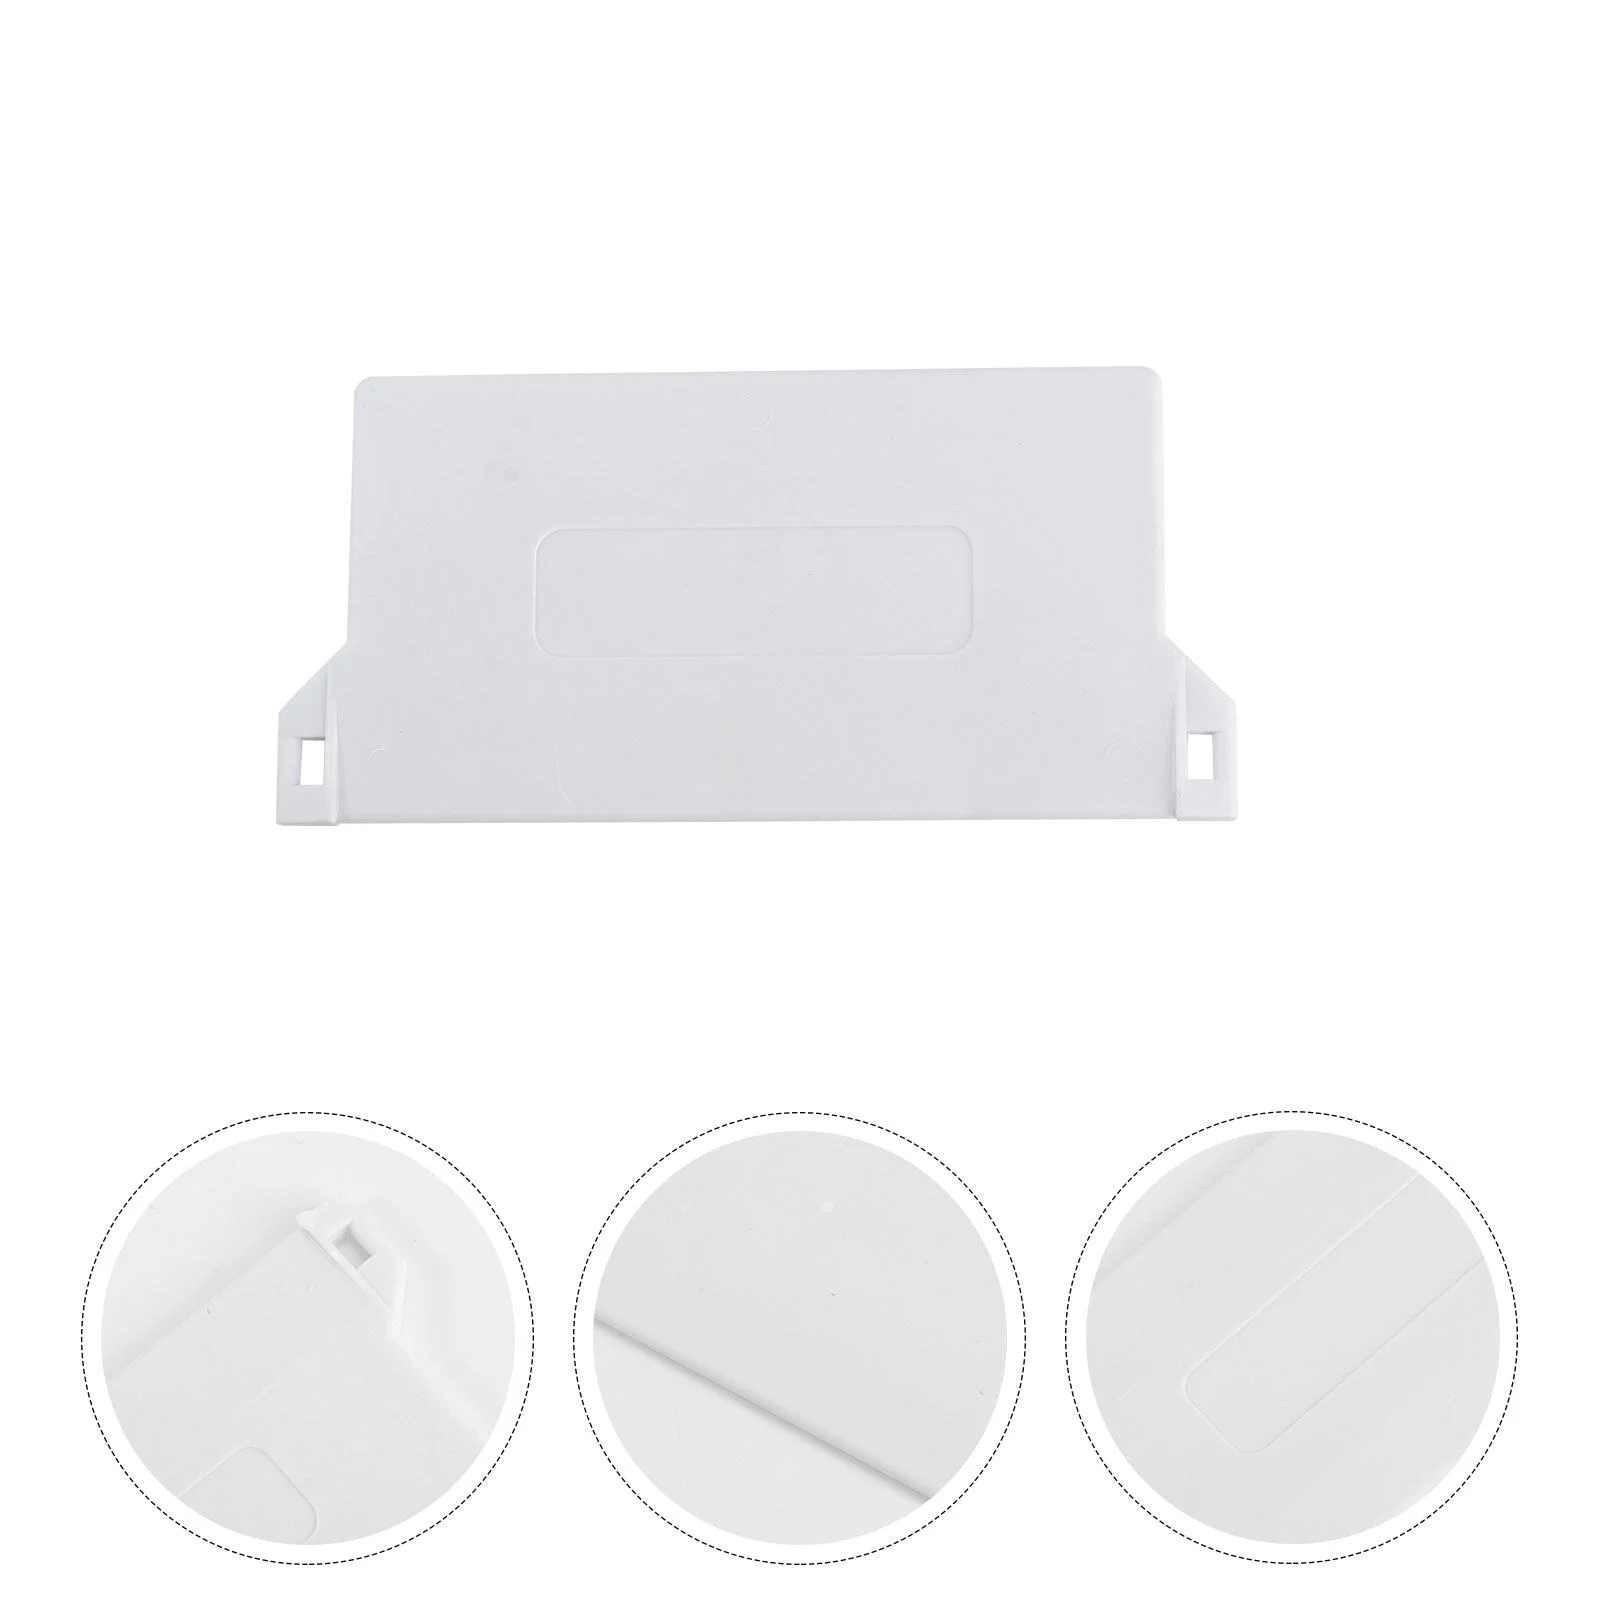 

White Drapes Weight, Blinds and Shades Repair Clips Tabs, 10PCS 89mm Bottom Plate for White Drapes Portable Bottom Weights